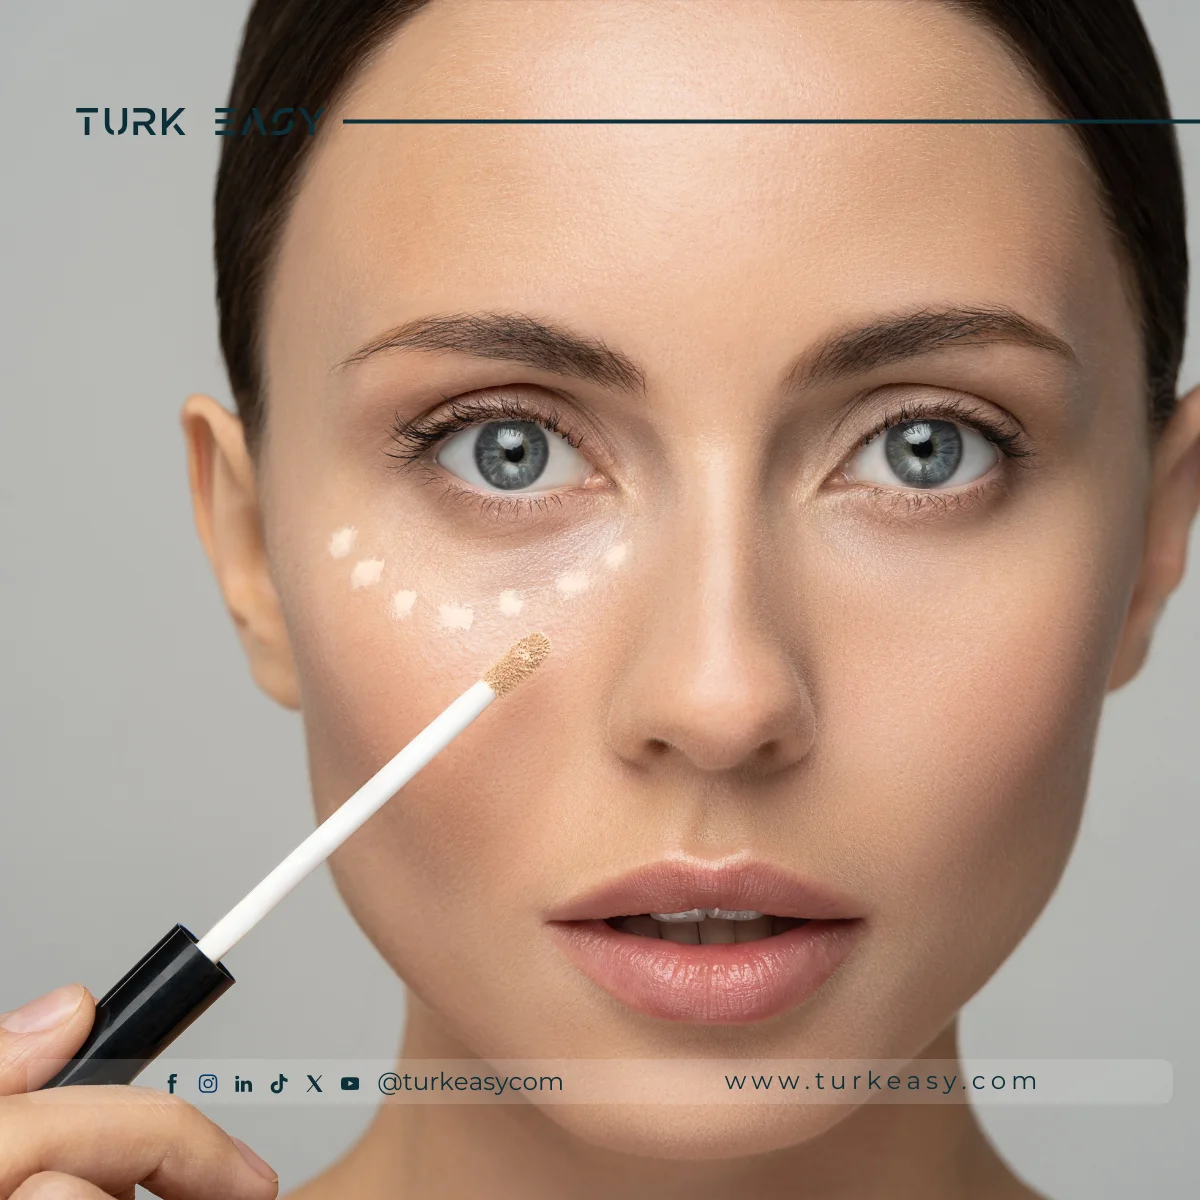 Under Eye Light Fillers - What They Are and Reasons for Undergoing the Procedure